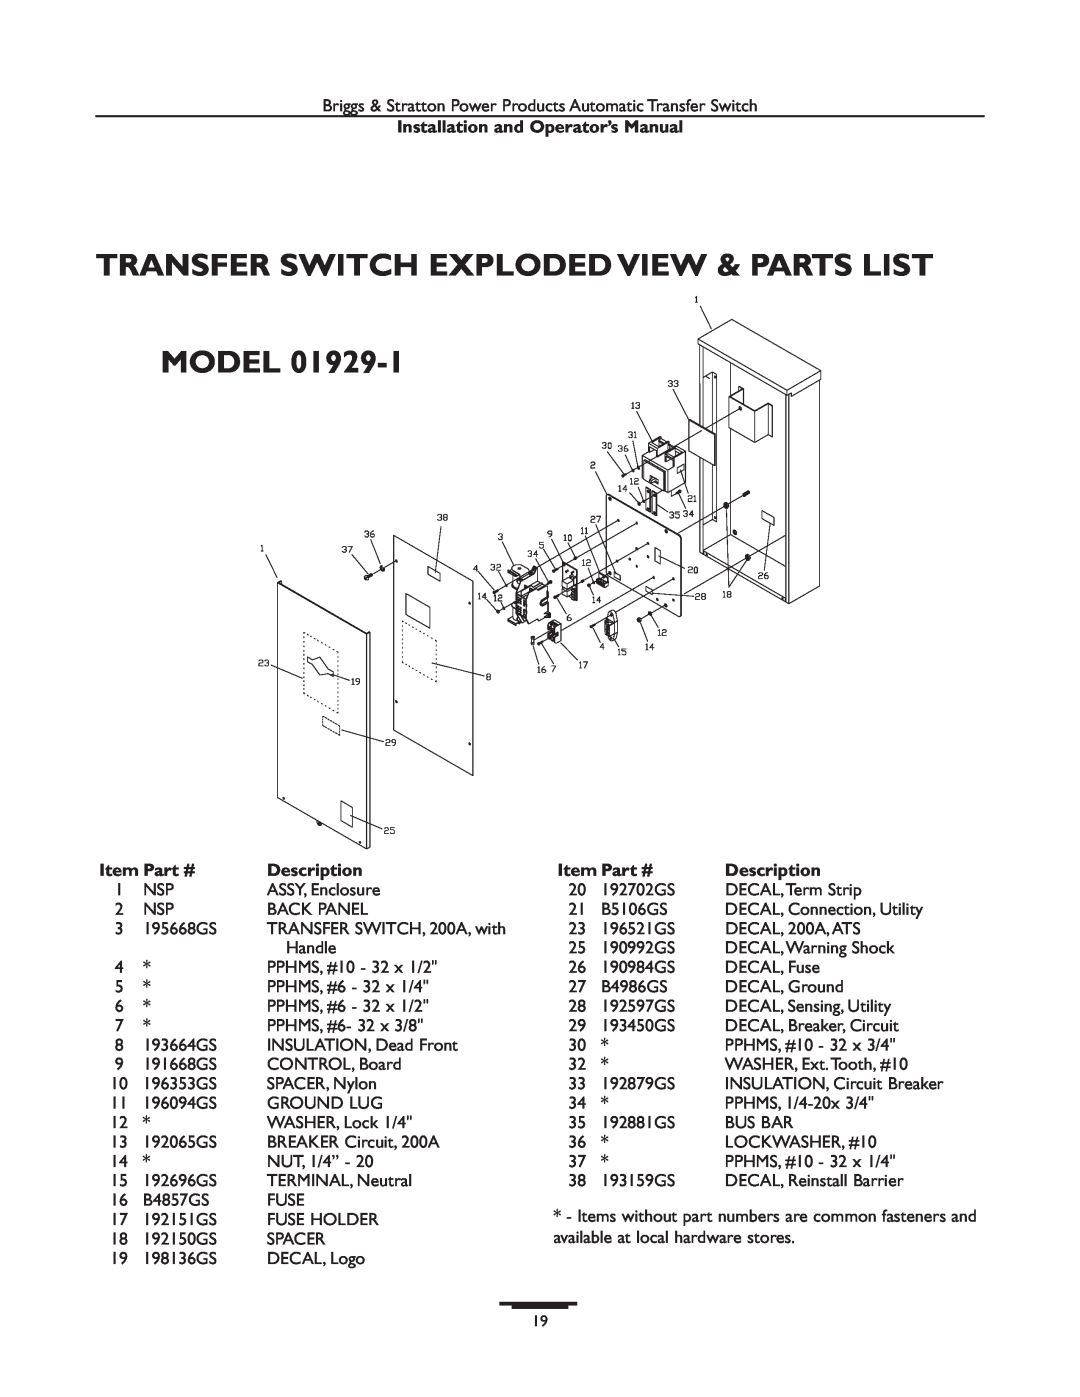 Briggs & Stratton 01813-1, 01928-1 Transfer Switch Exploded View & Parts List Model, Installation and Operator’s Manual 